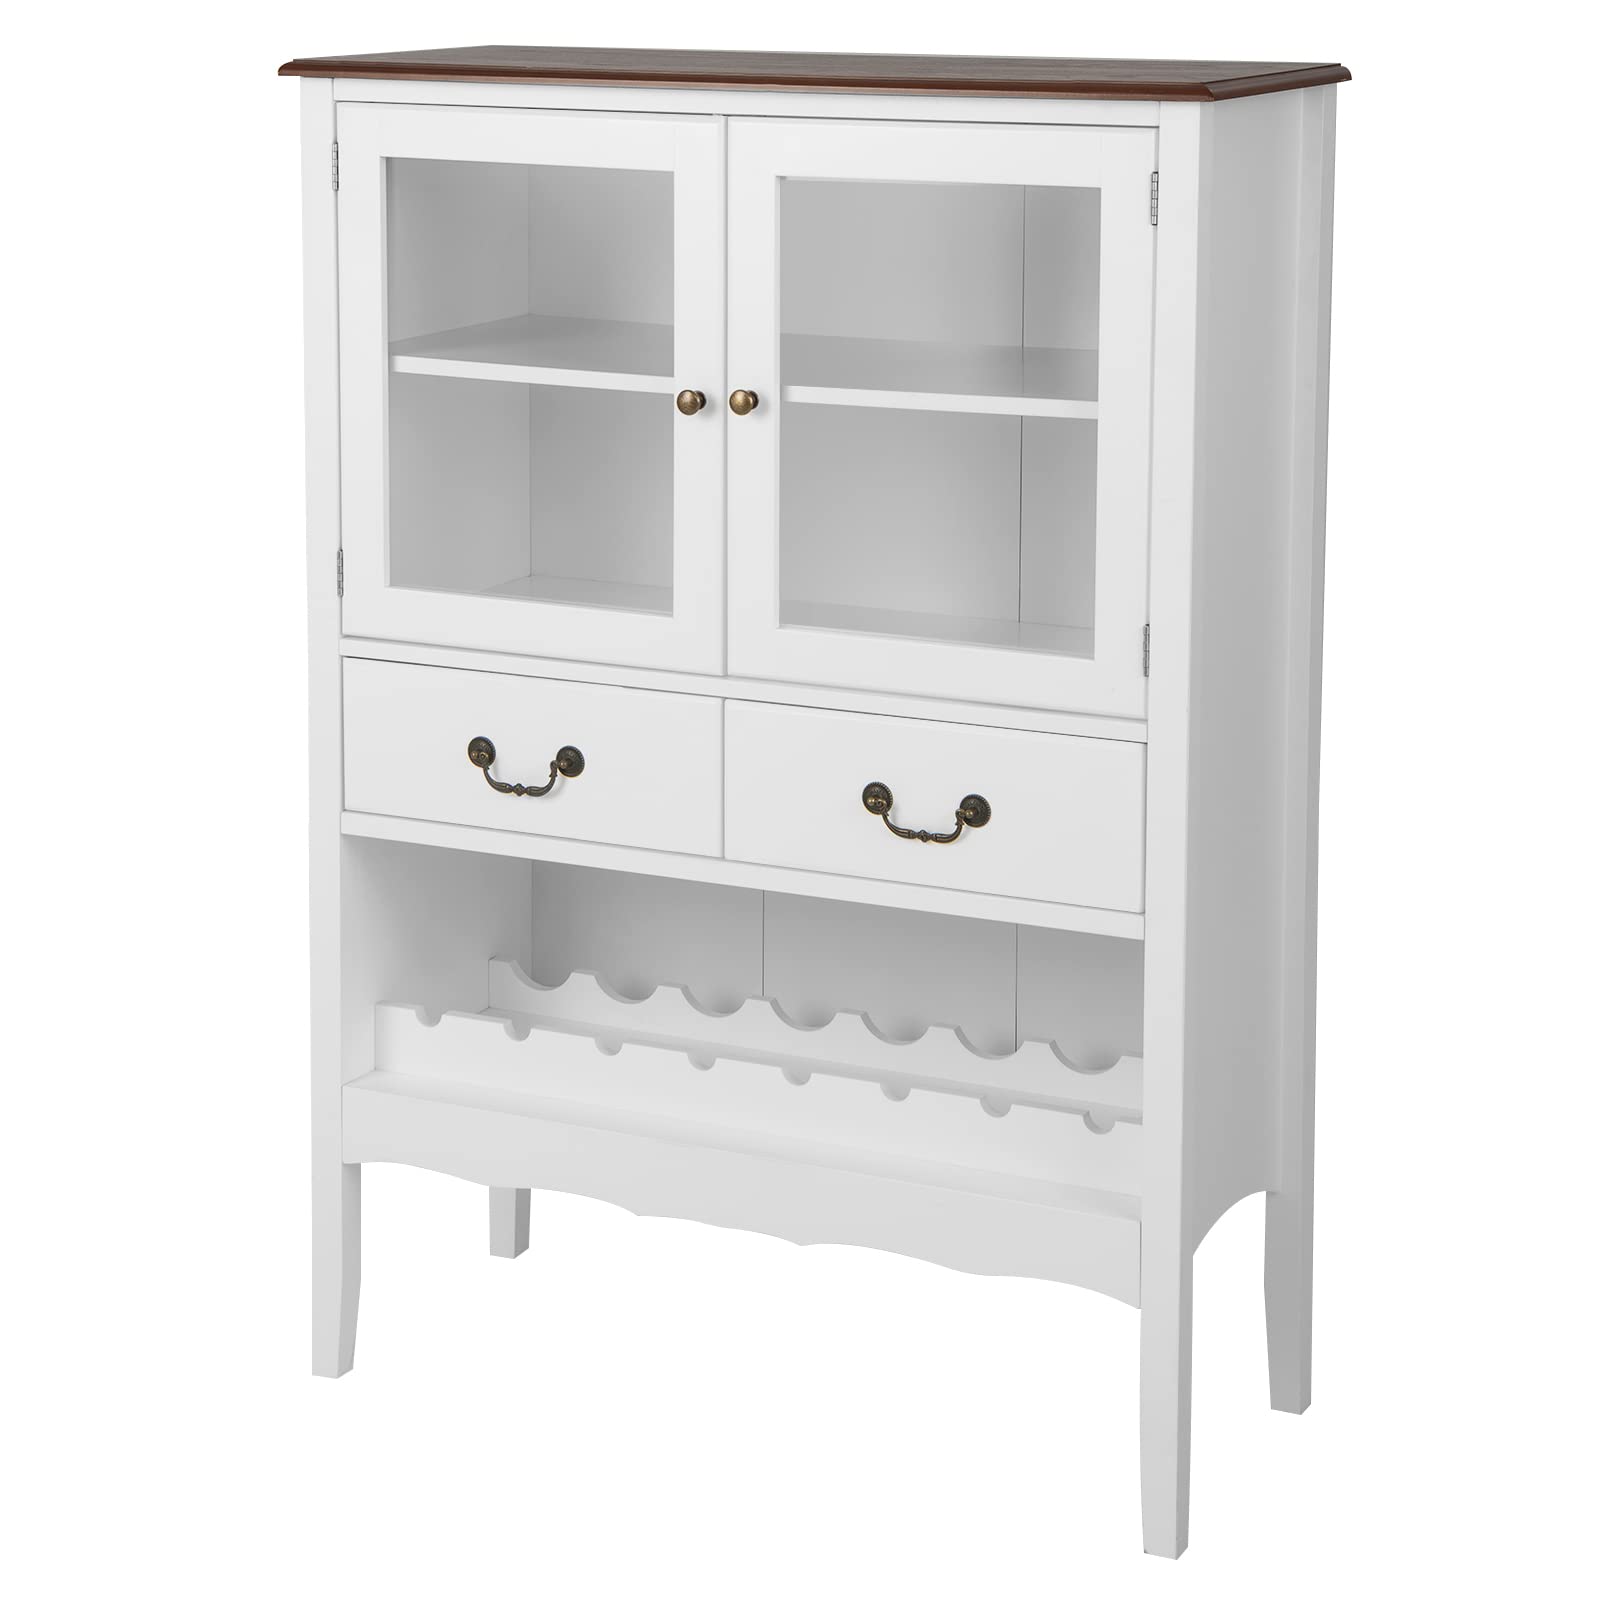 Giantex Buffet Wine Cabinet with Storage - Standing Sideboard